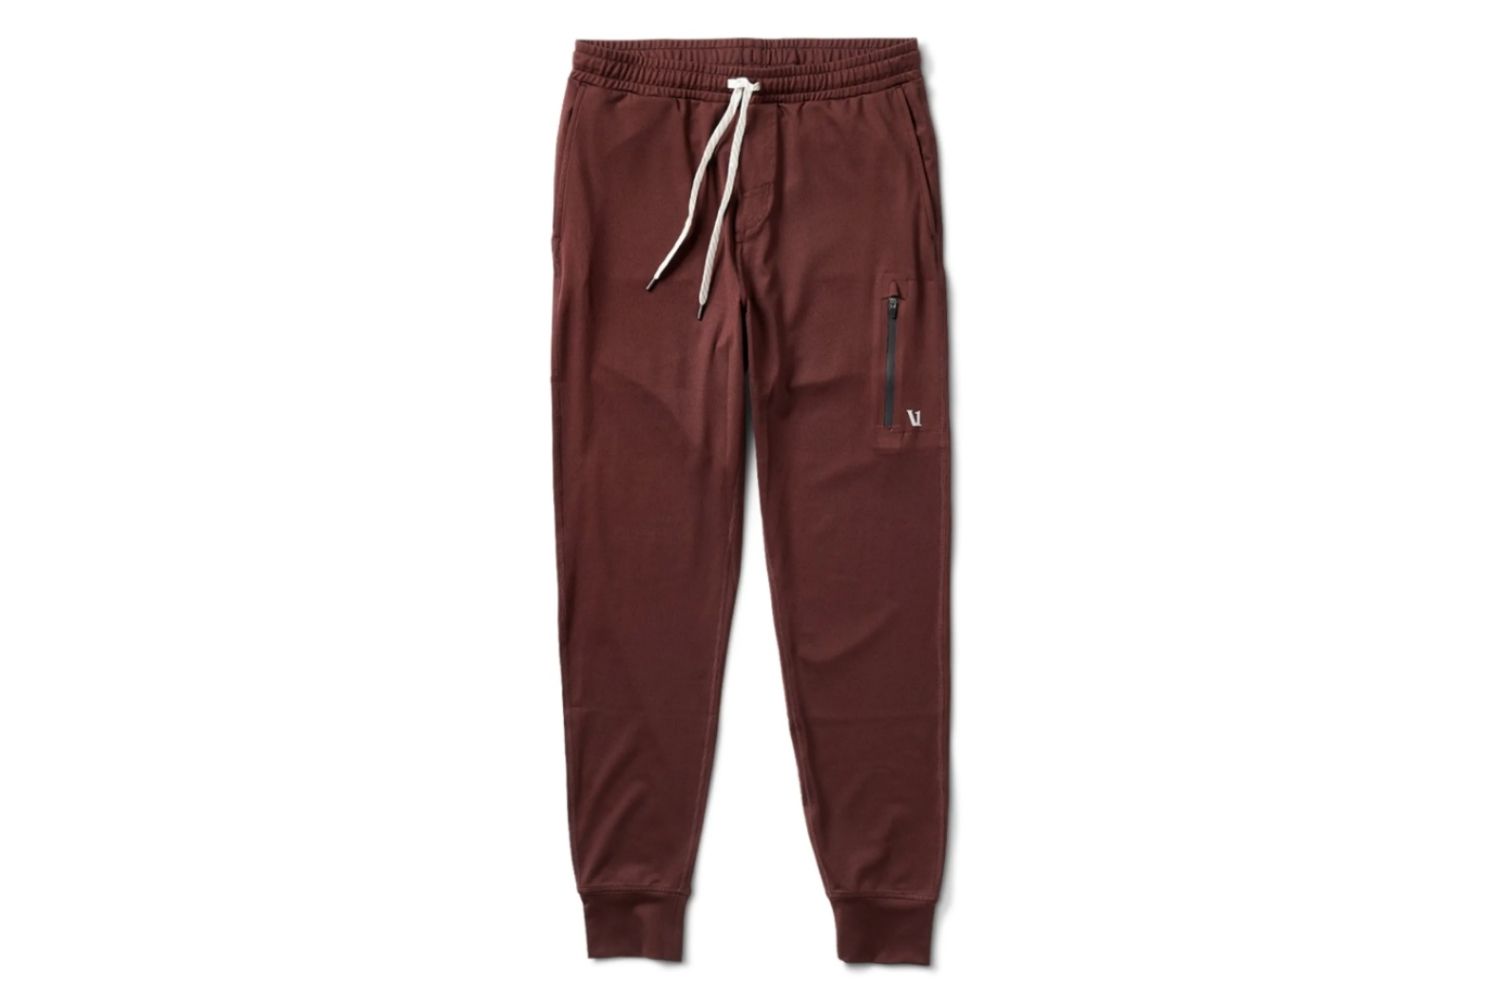 The 8 Best Stylish Joggers for Men - The Manual